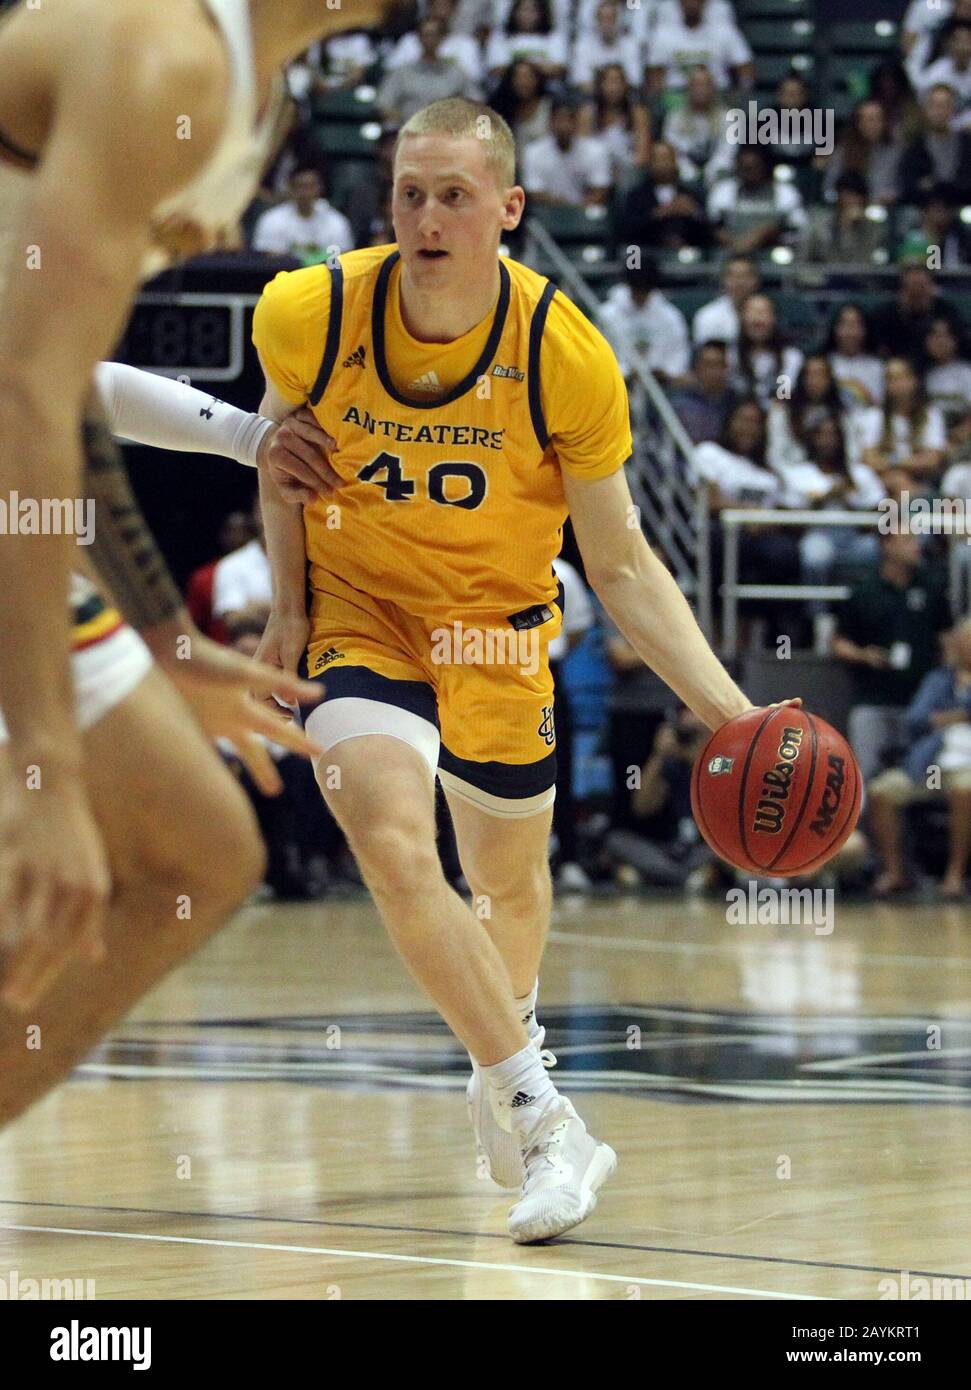 February 15, 2020 - UC Irvine Anteaters forward Collin Welp (40) dribbles during a game between the UC Irvine Anteaters and the Hawaii Rainbow Warriors at the Stan Sheriff Center in Honolulu, HI - Michael Sullivan/CSM Stock Photo